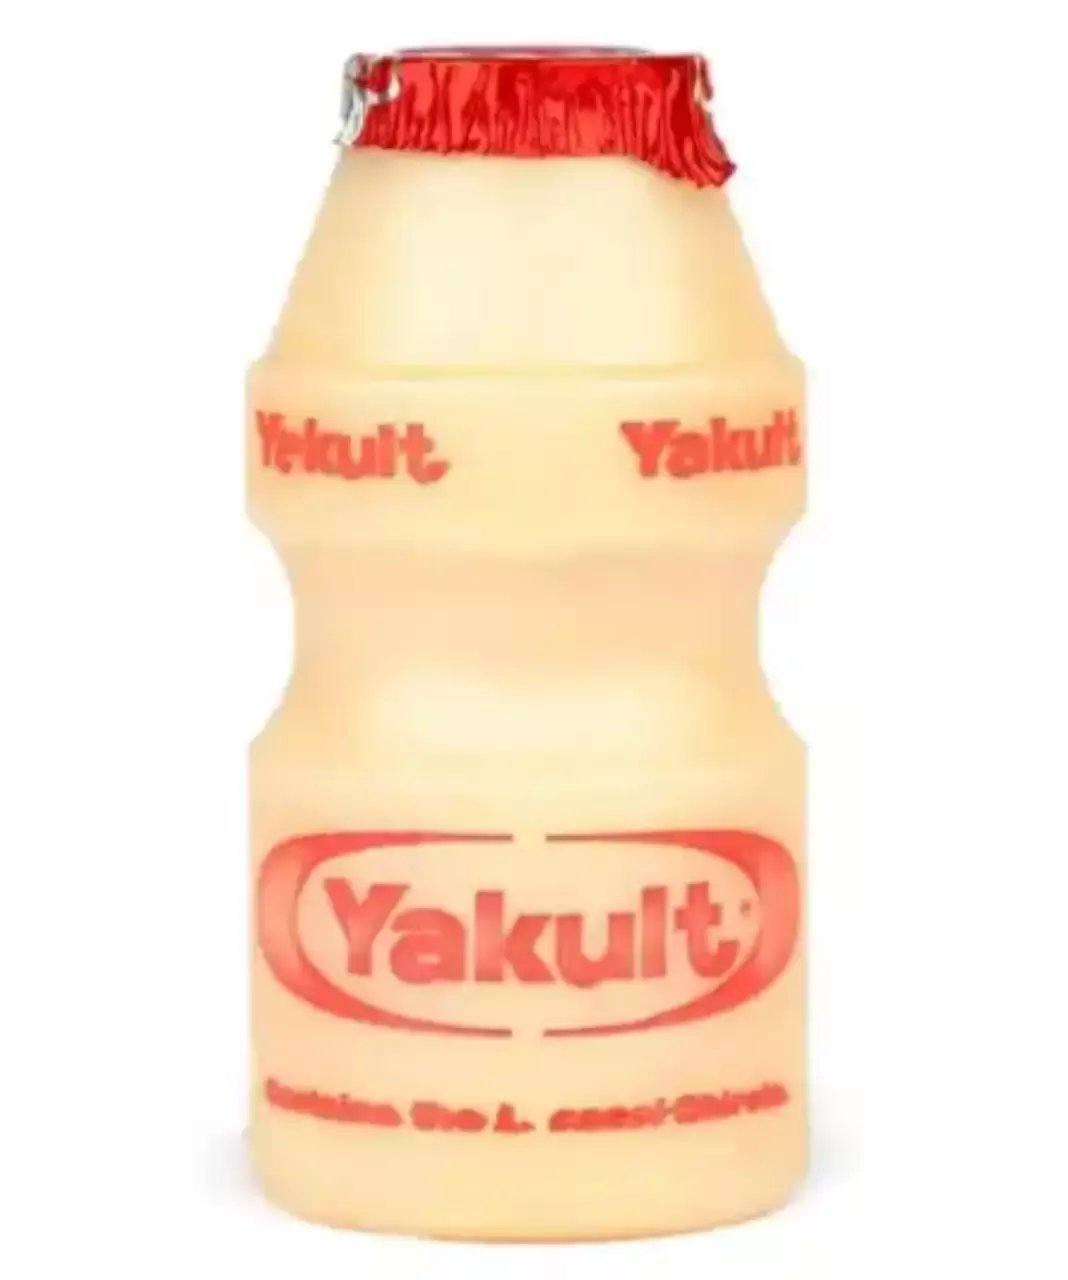 Yakult Fat or Lose Weight?